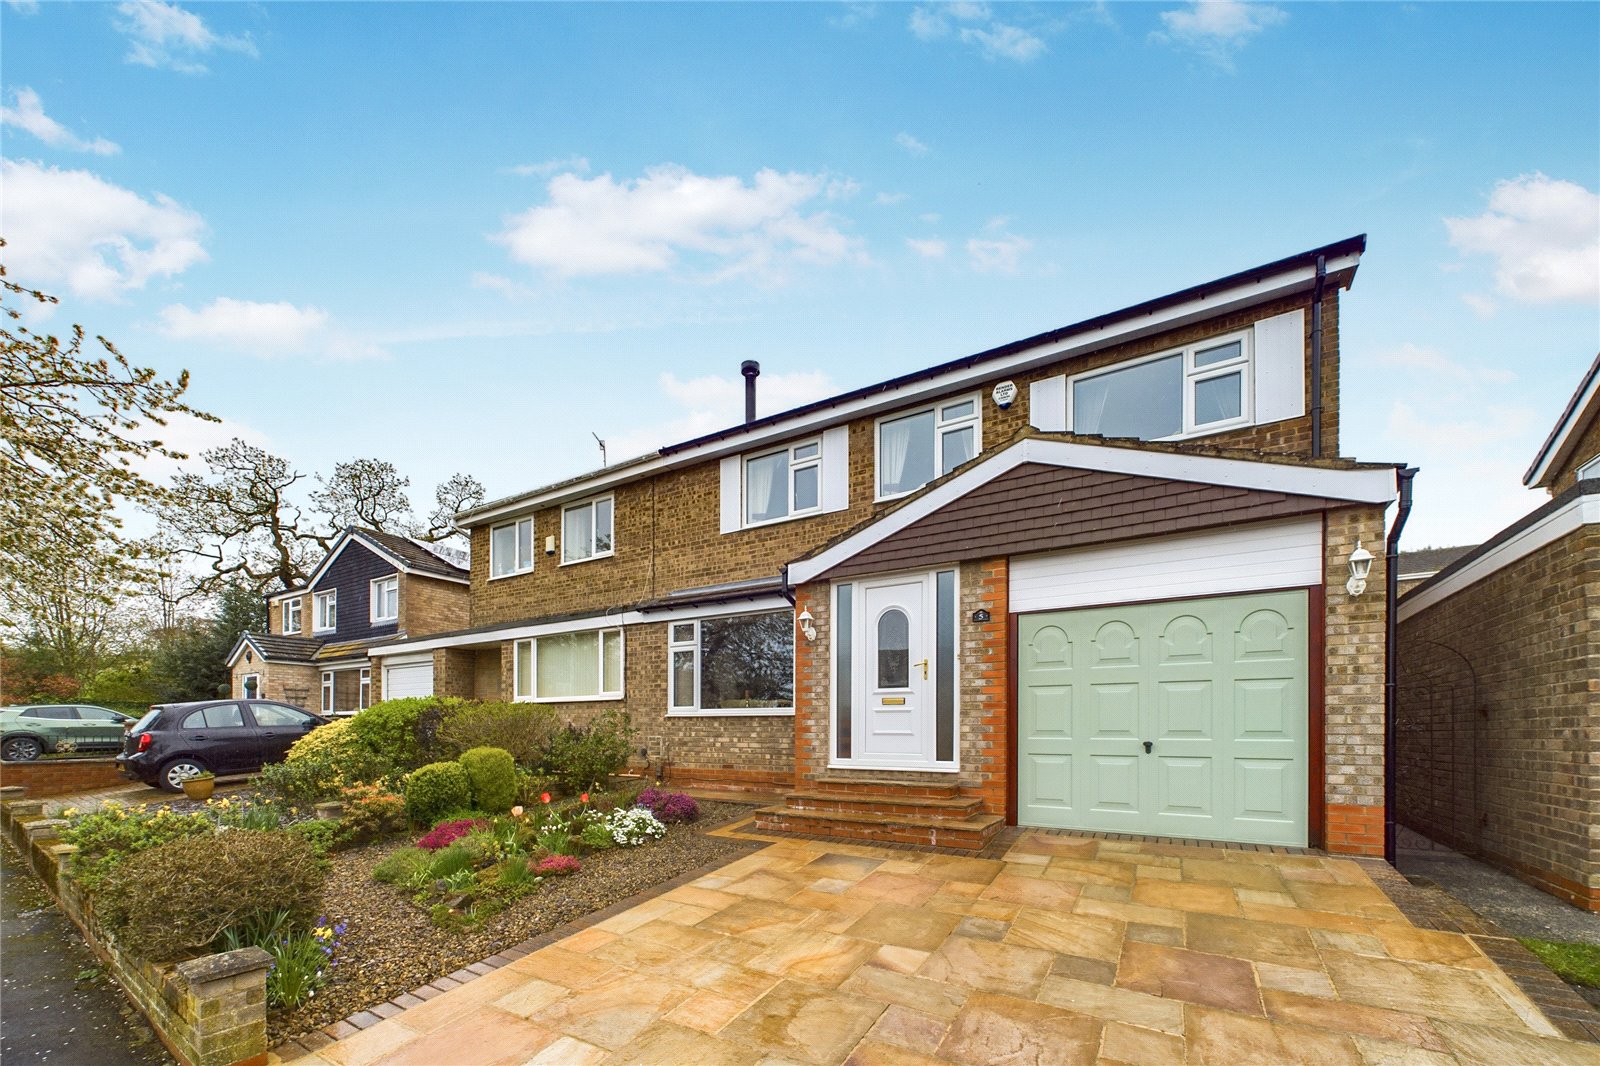 3 bed house for sale in Enfield Chase, Guisborough 1